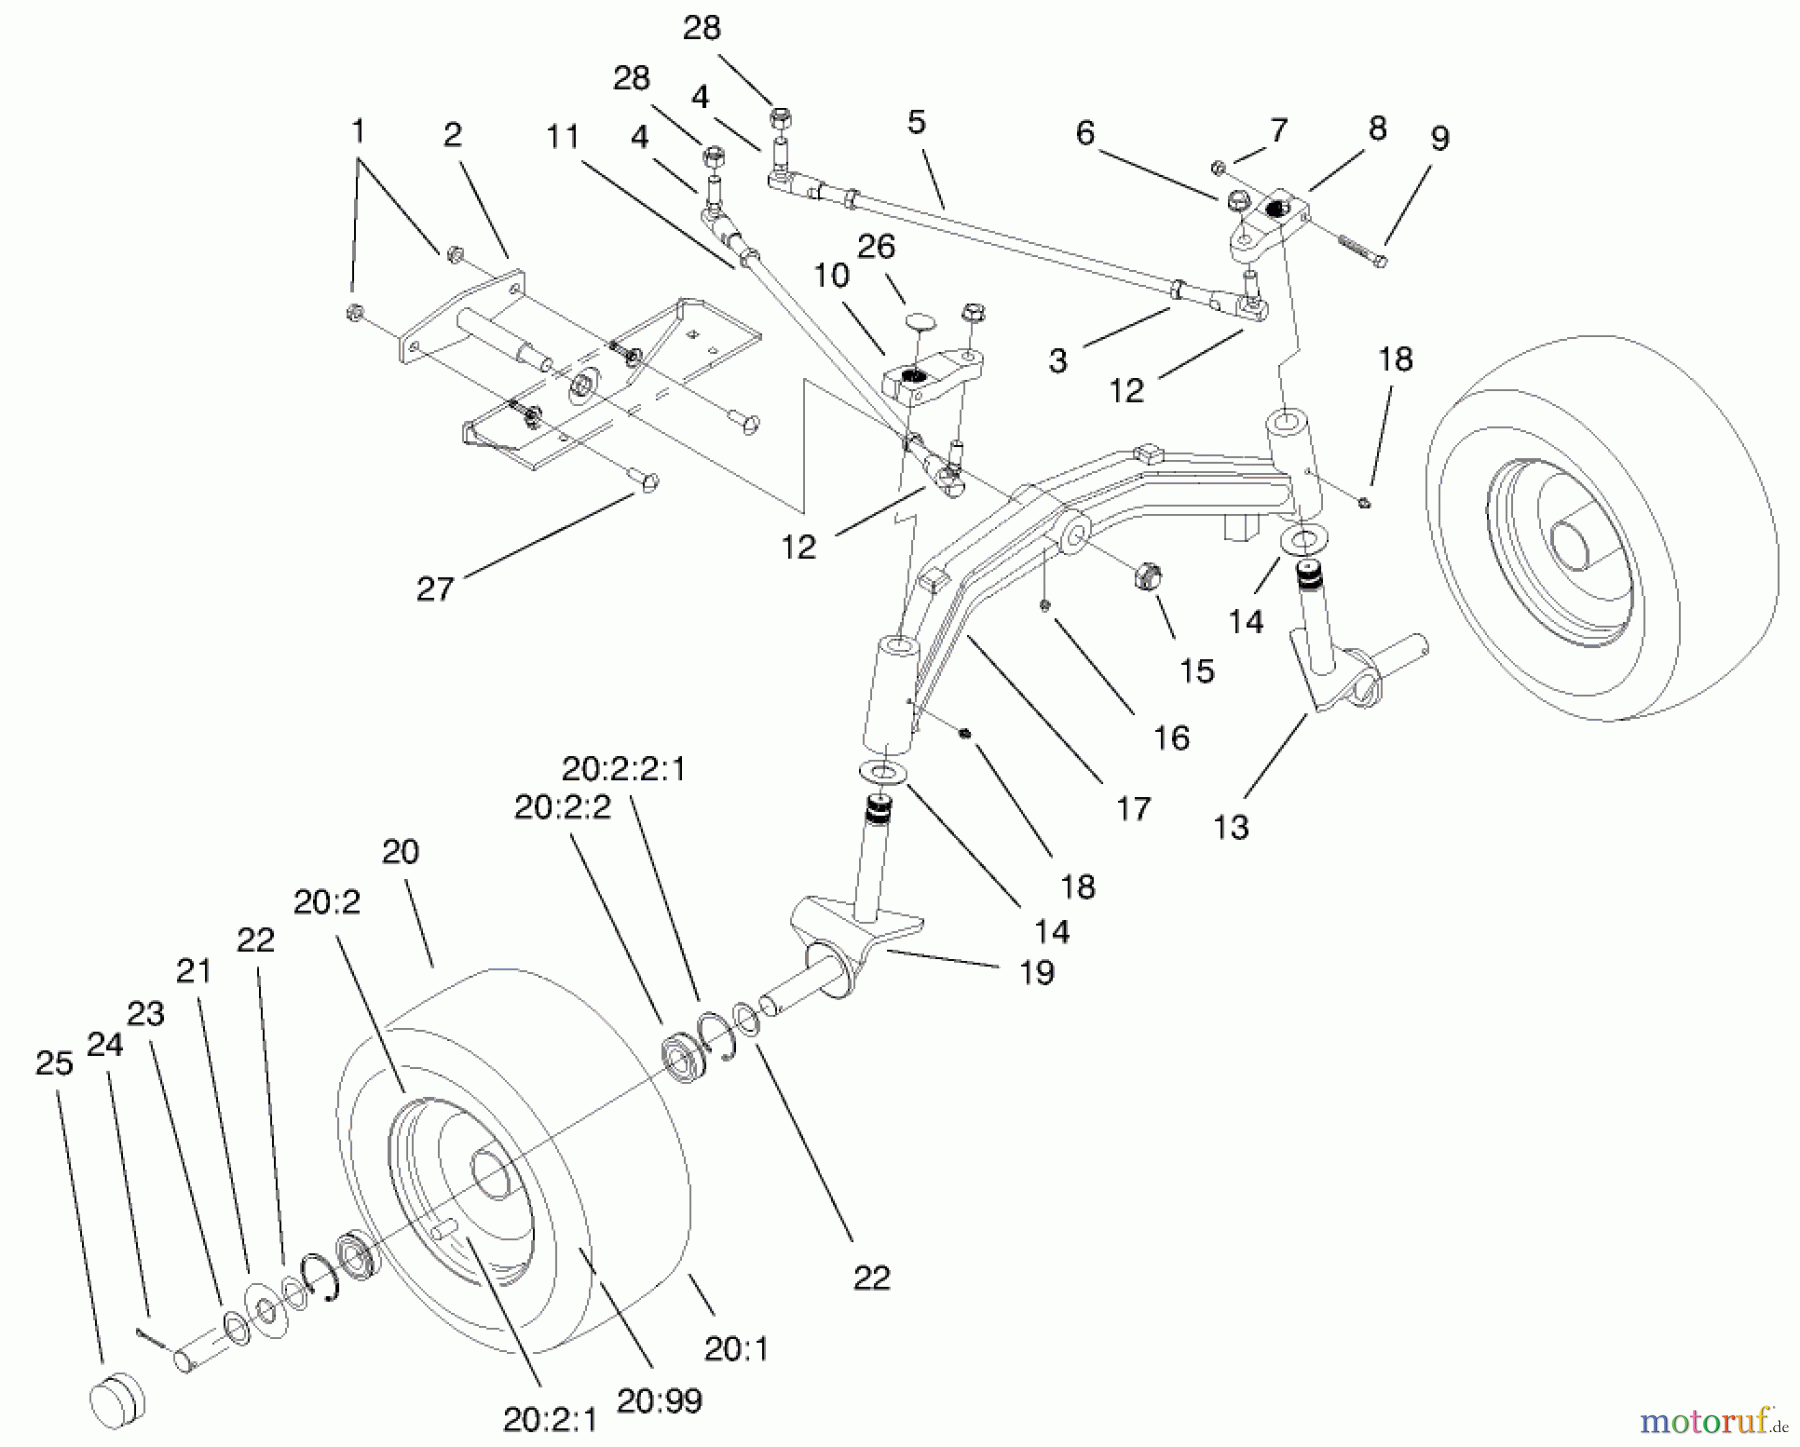  Toro Neu Mowers, Lawn & Garden Tractor Seite 1 73552 (523Dxi) - Toro 523Dxi Garden Tractor, 1999 (9900001-9999999) TIE RODS, SPINDLE, & FRONT AXLE ASSEMBLY